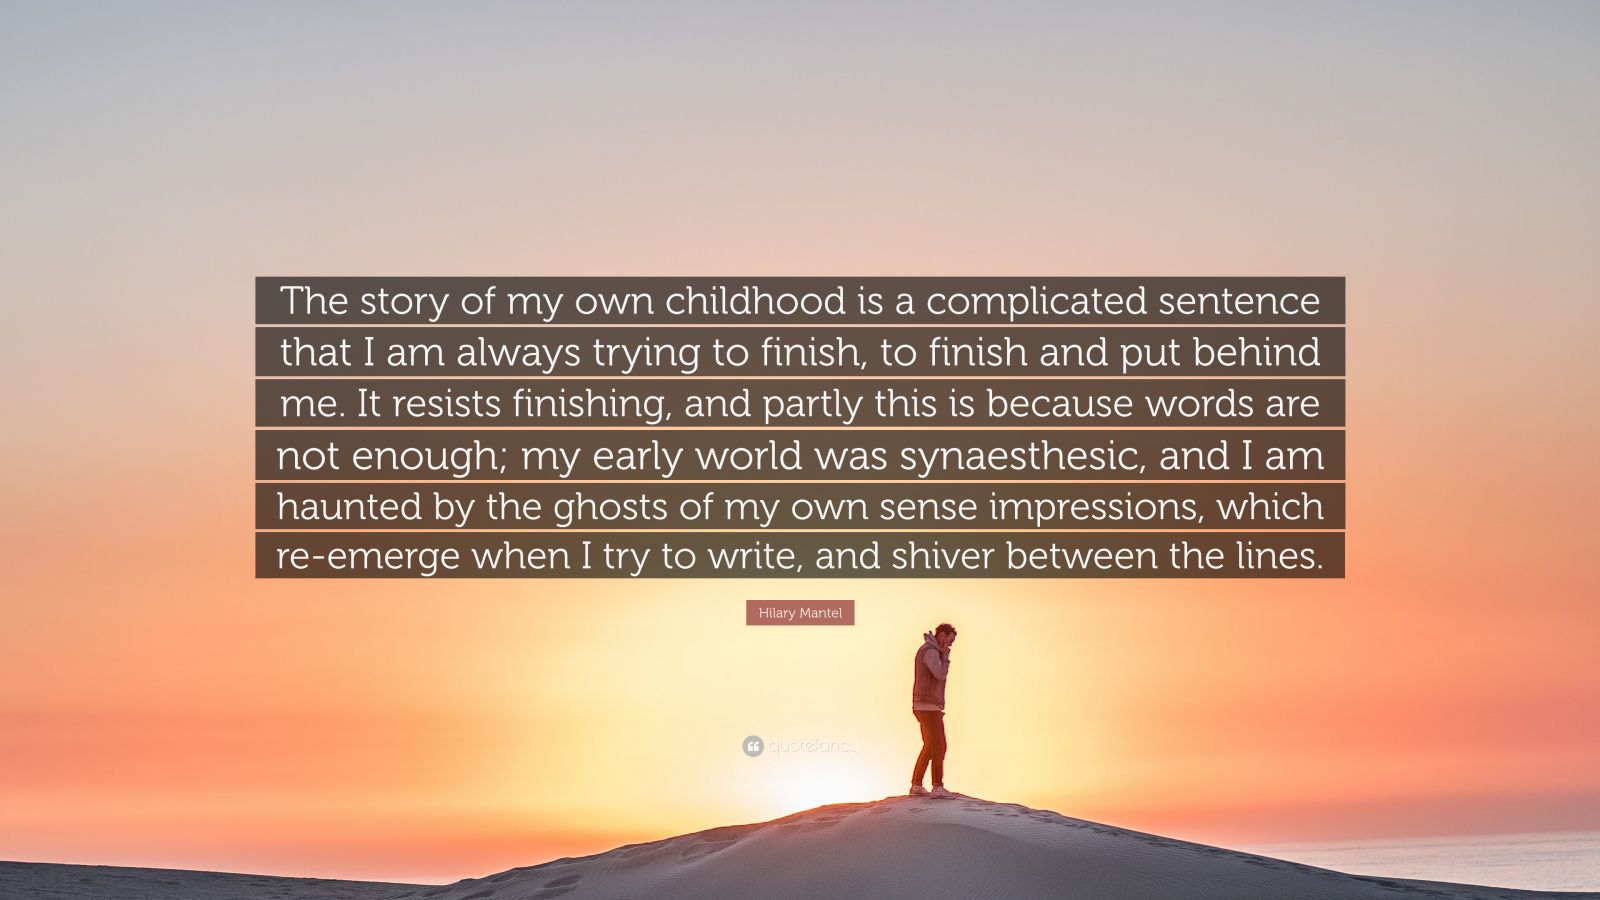 Hilary Mantel Quote “The story of my own childhood is a complicated